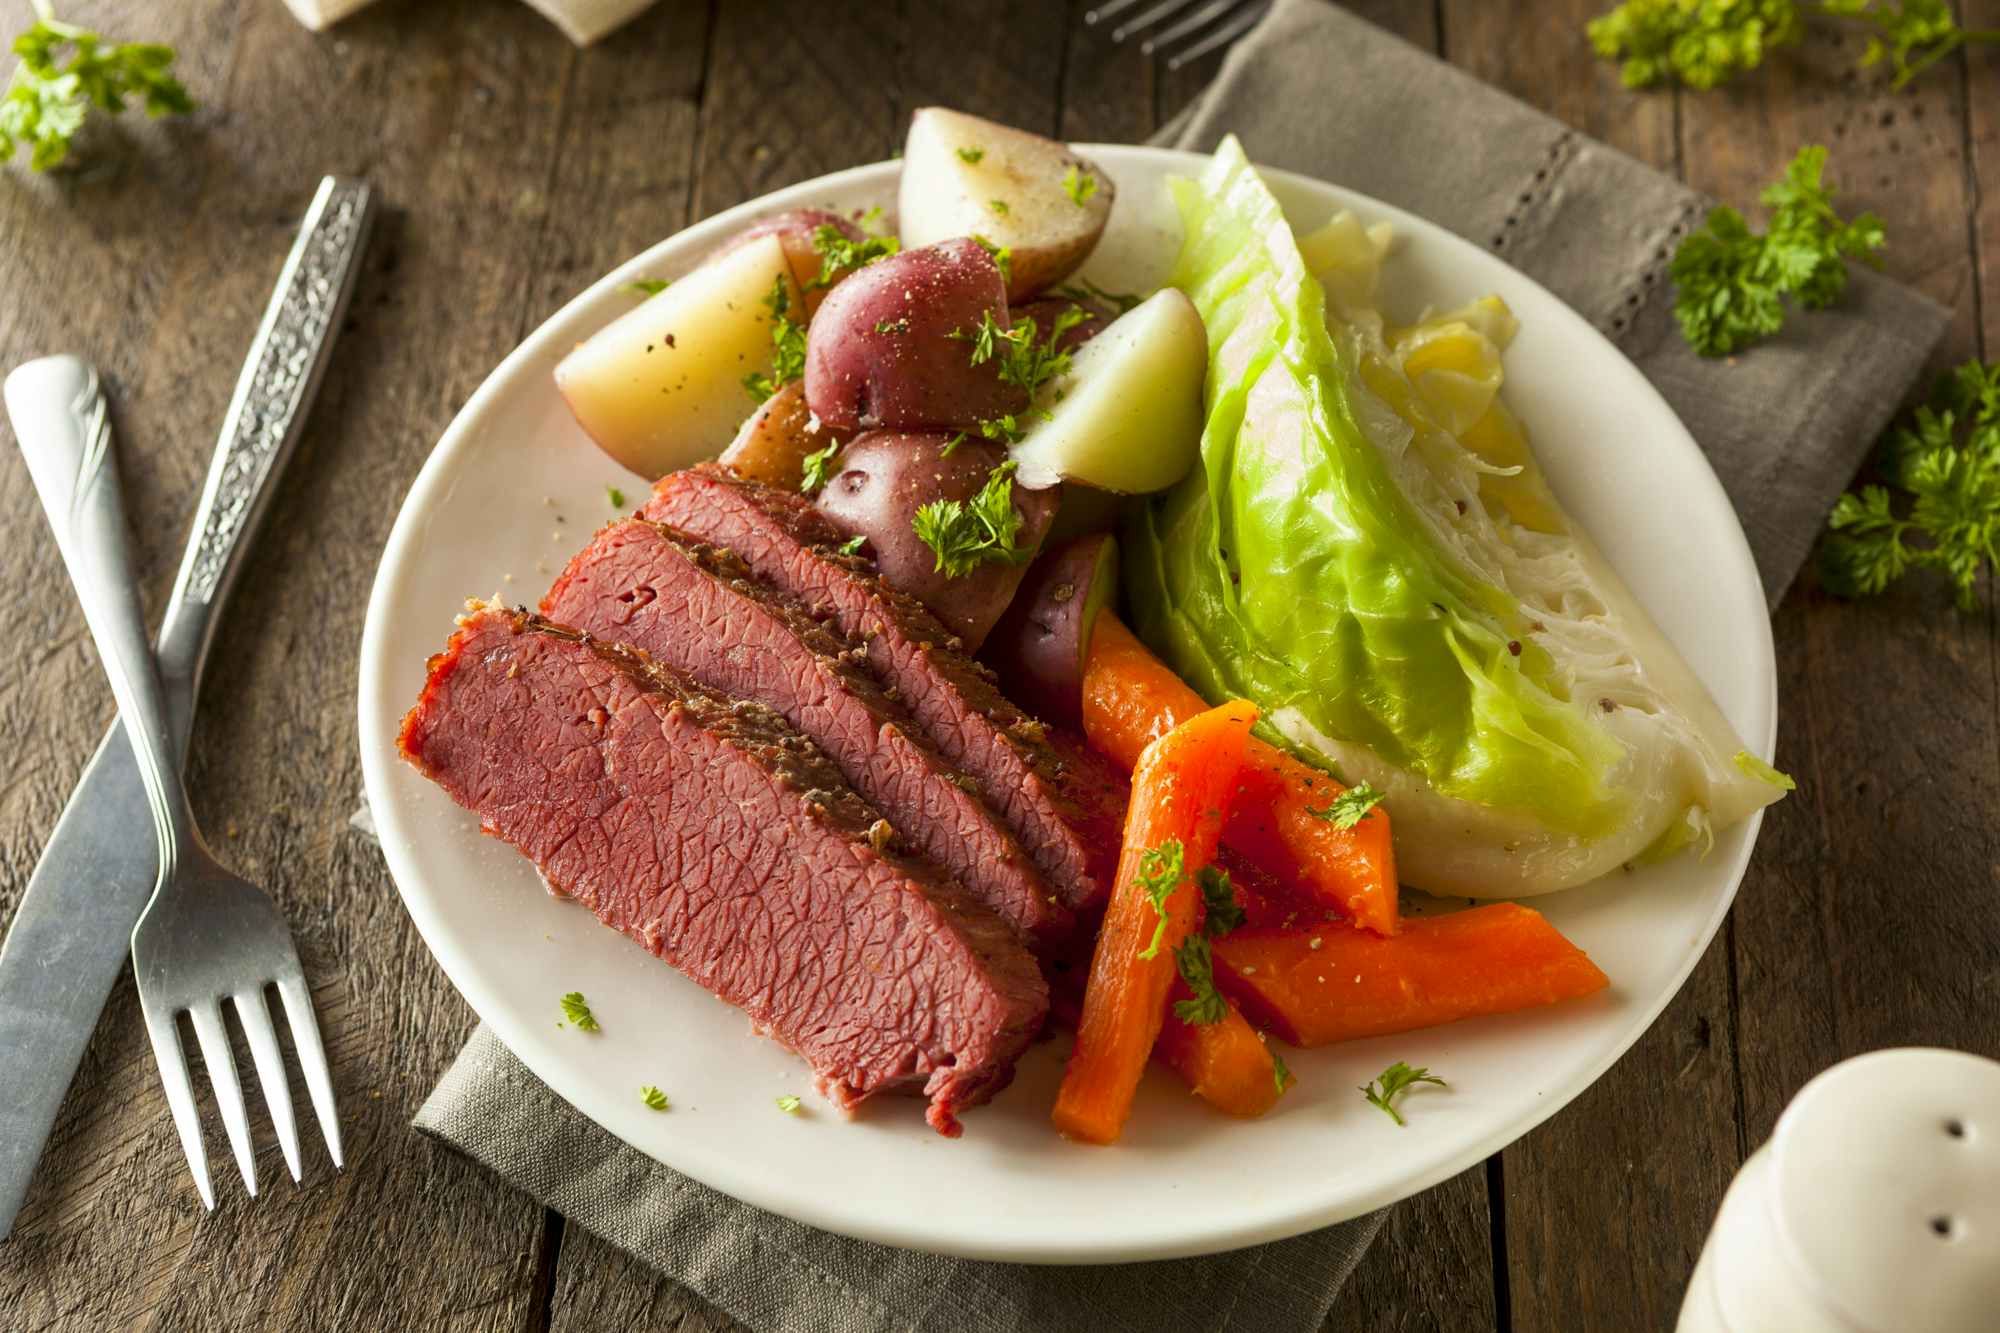 A corned beef and cabbage dinner on a plate with carrots and potatoes